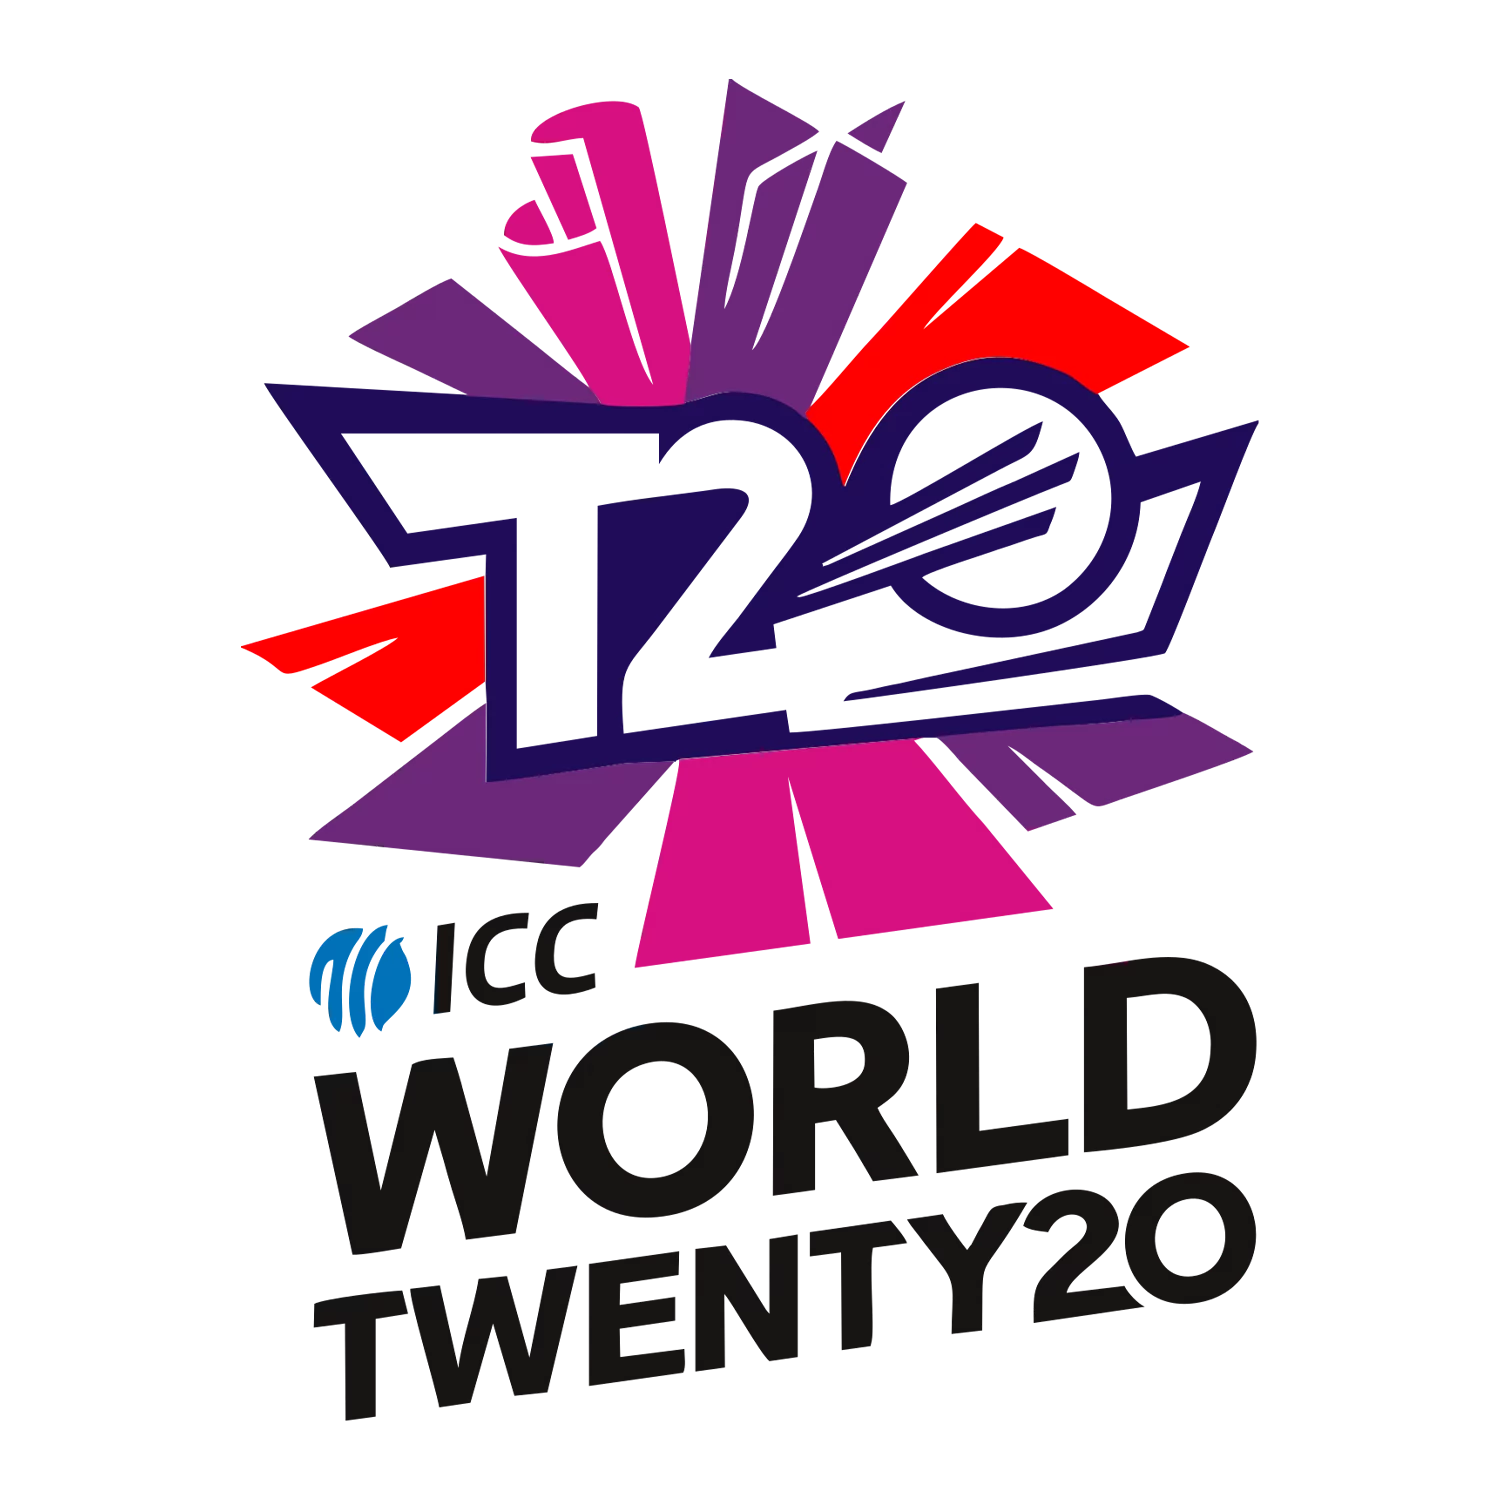 From this article, you learn the structure, rules, and teams of the T20 World Cup.